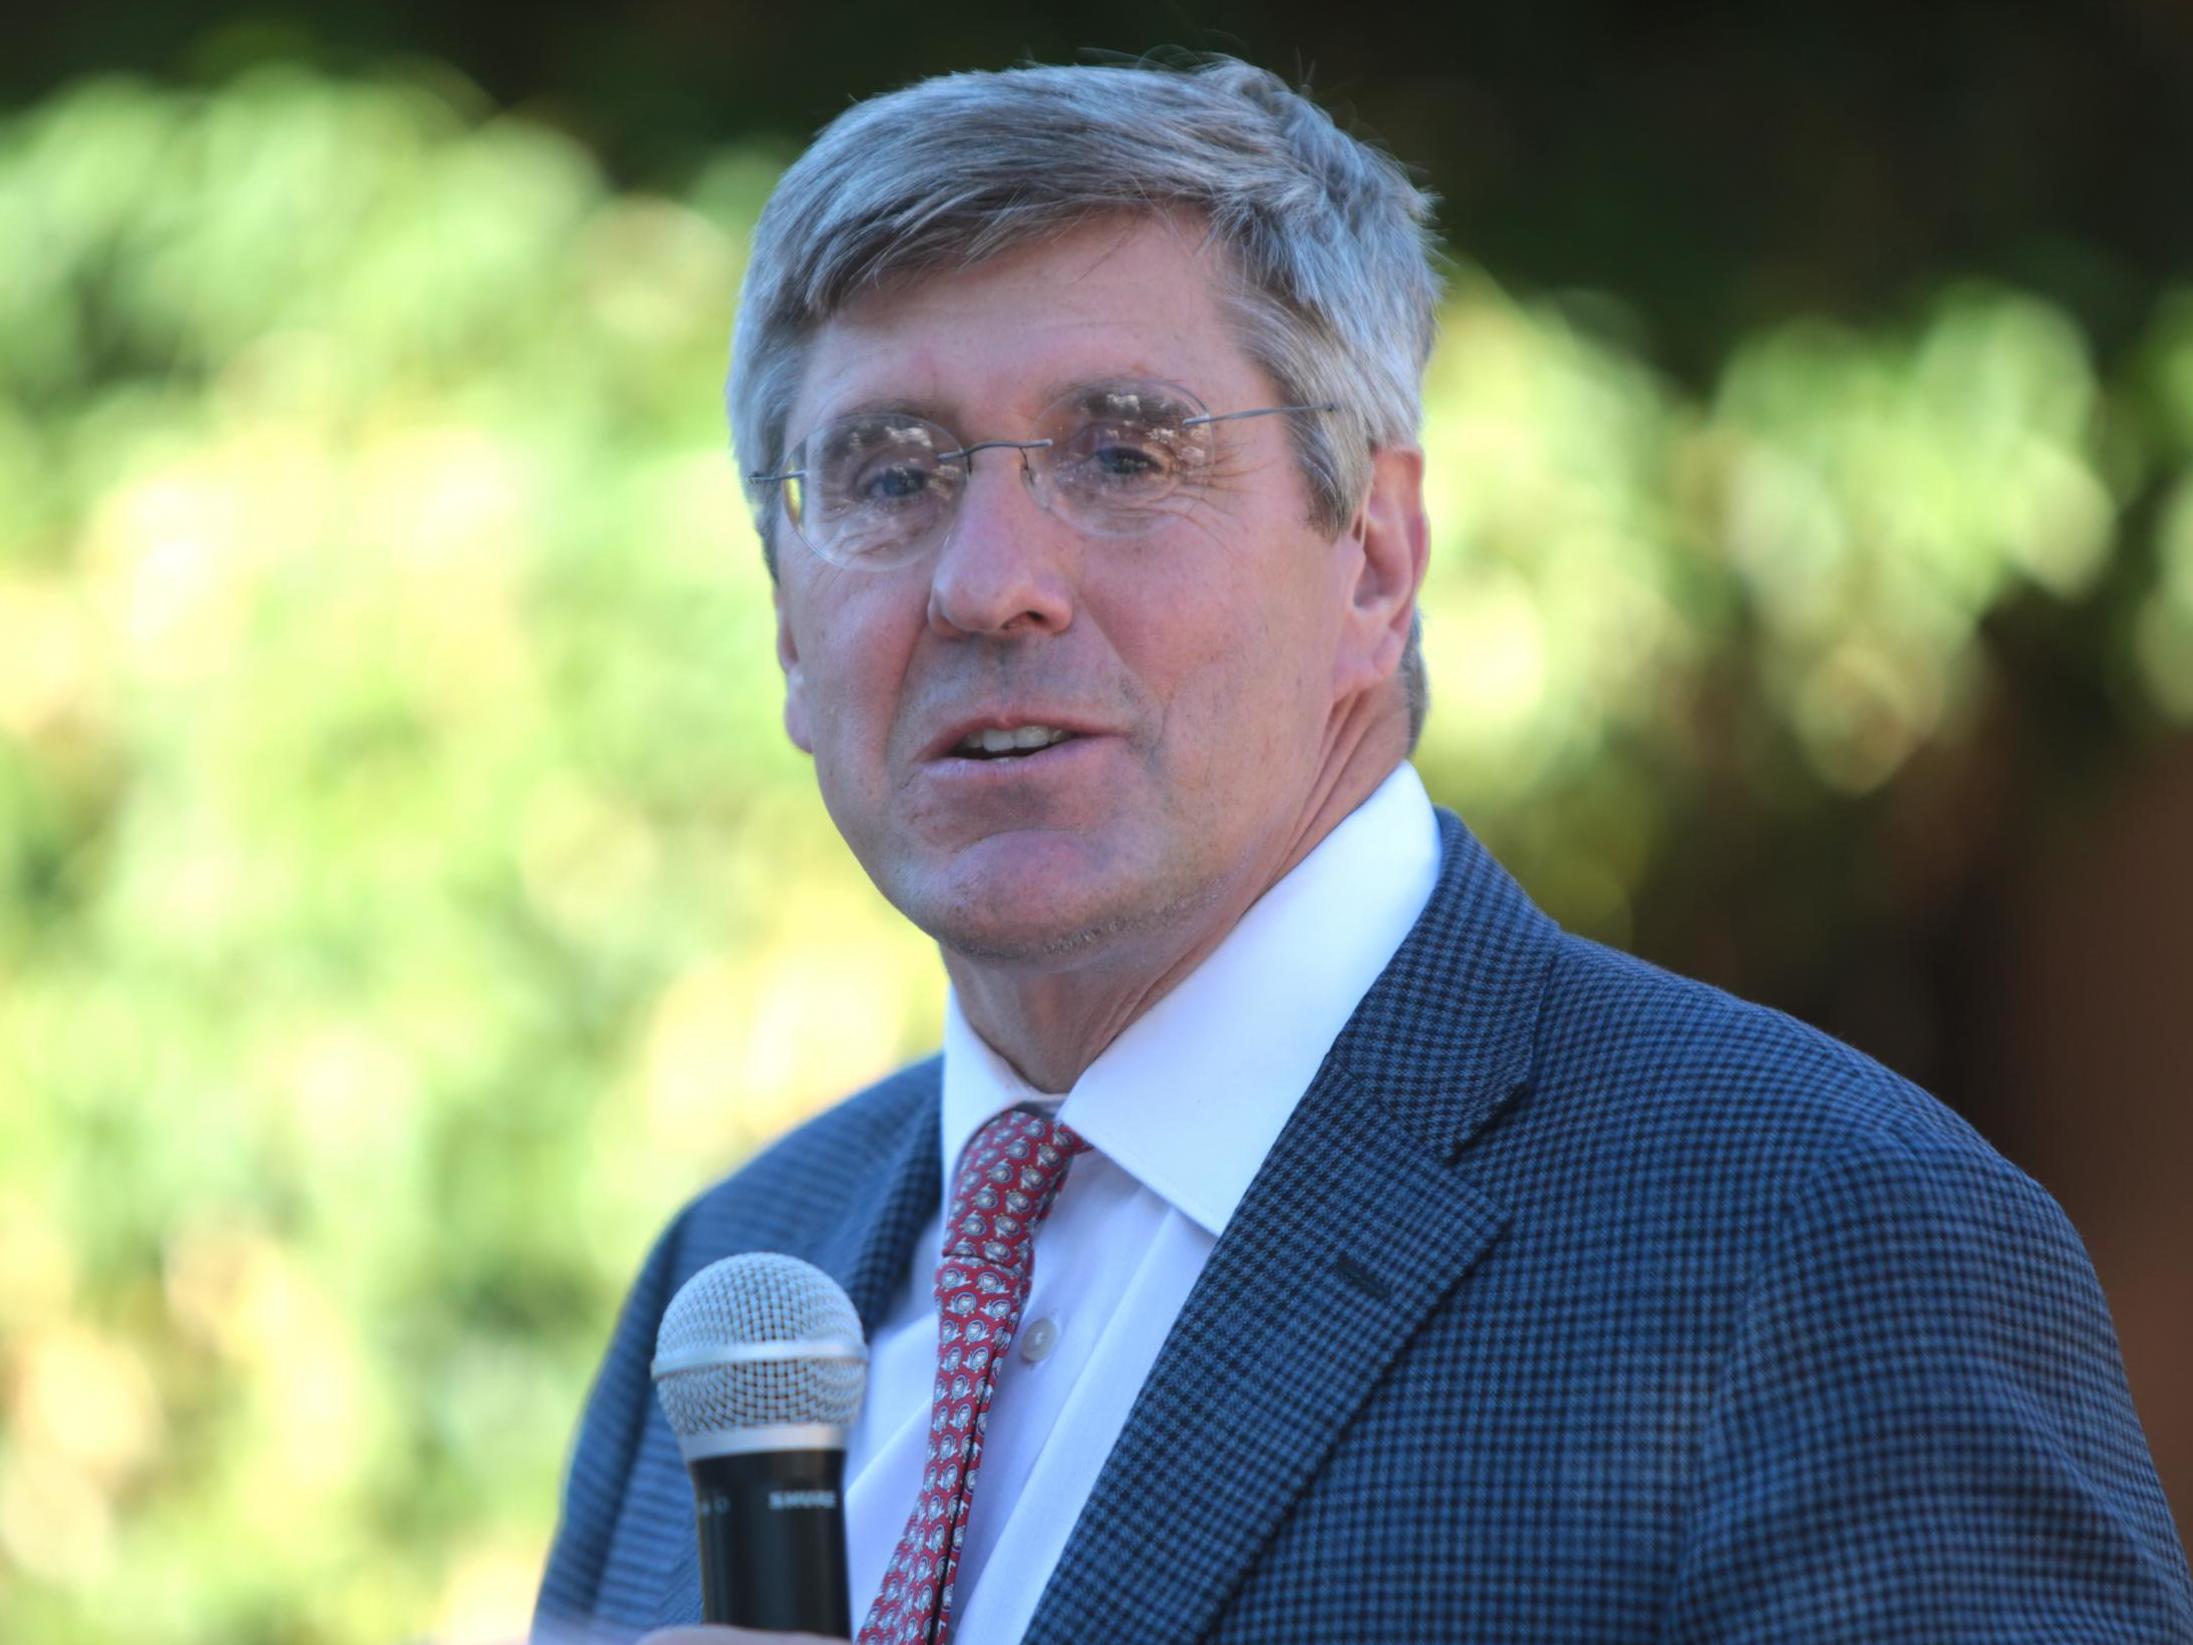 WH economic adviser Stephen Moore reportedly called the president's first debate a "crappy" performance.